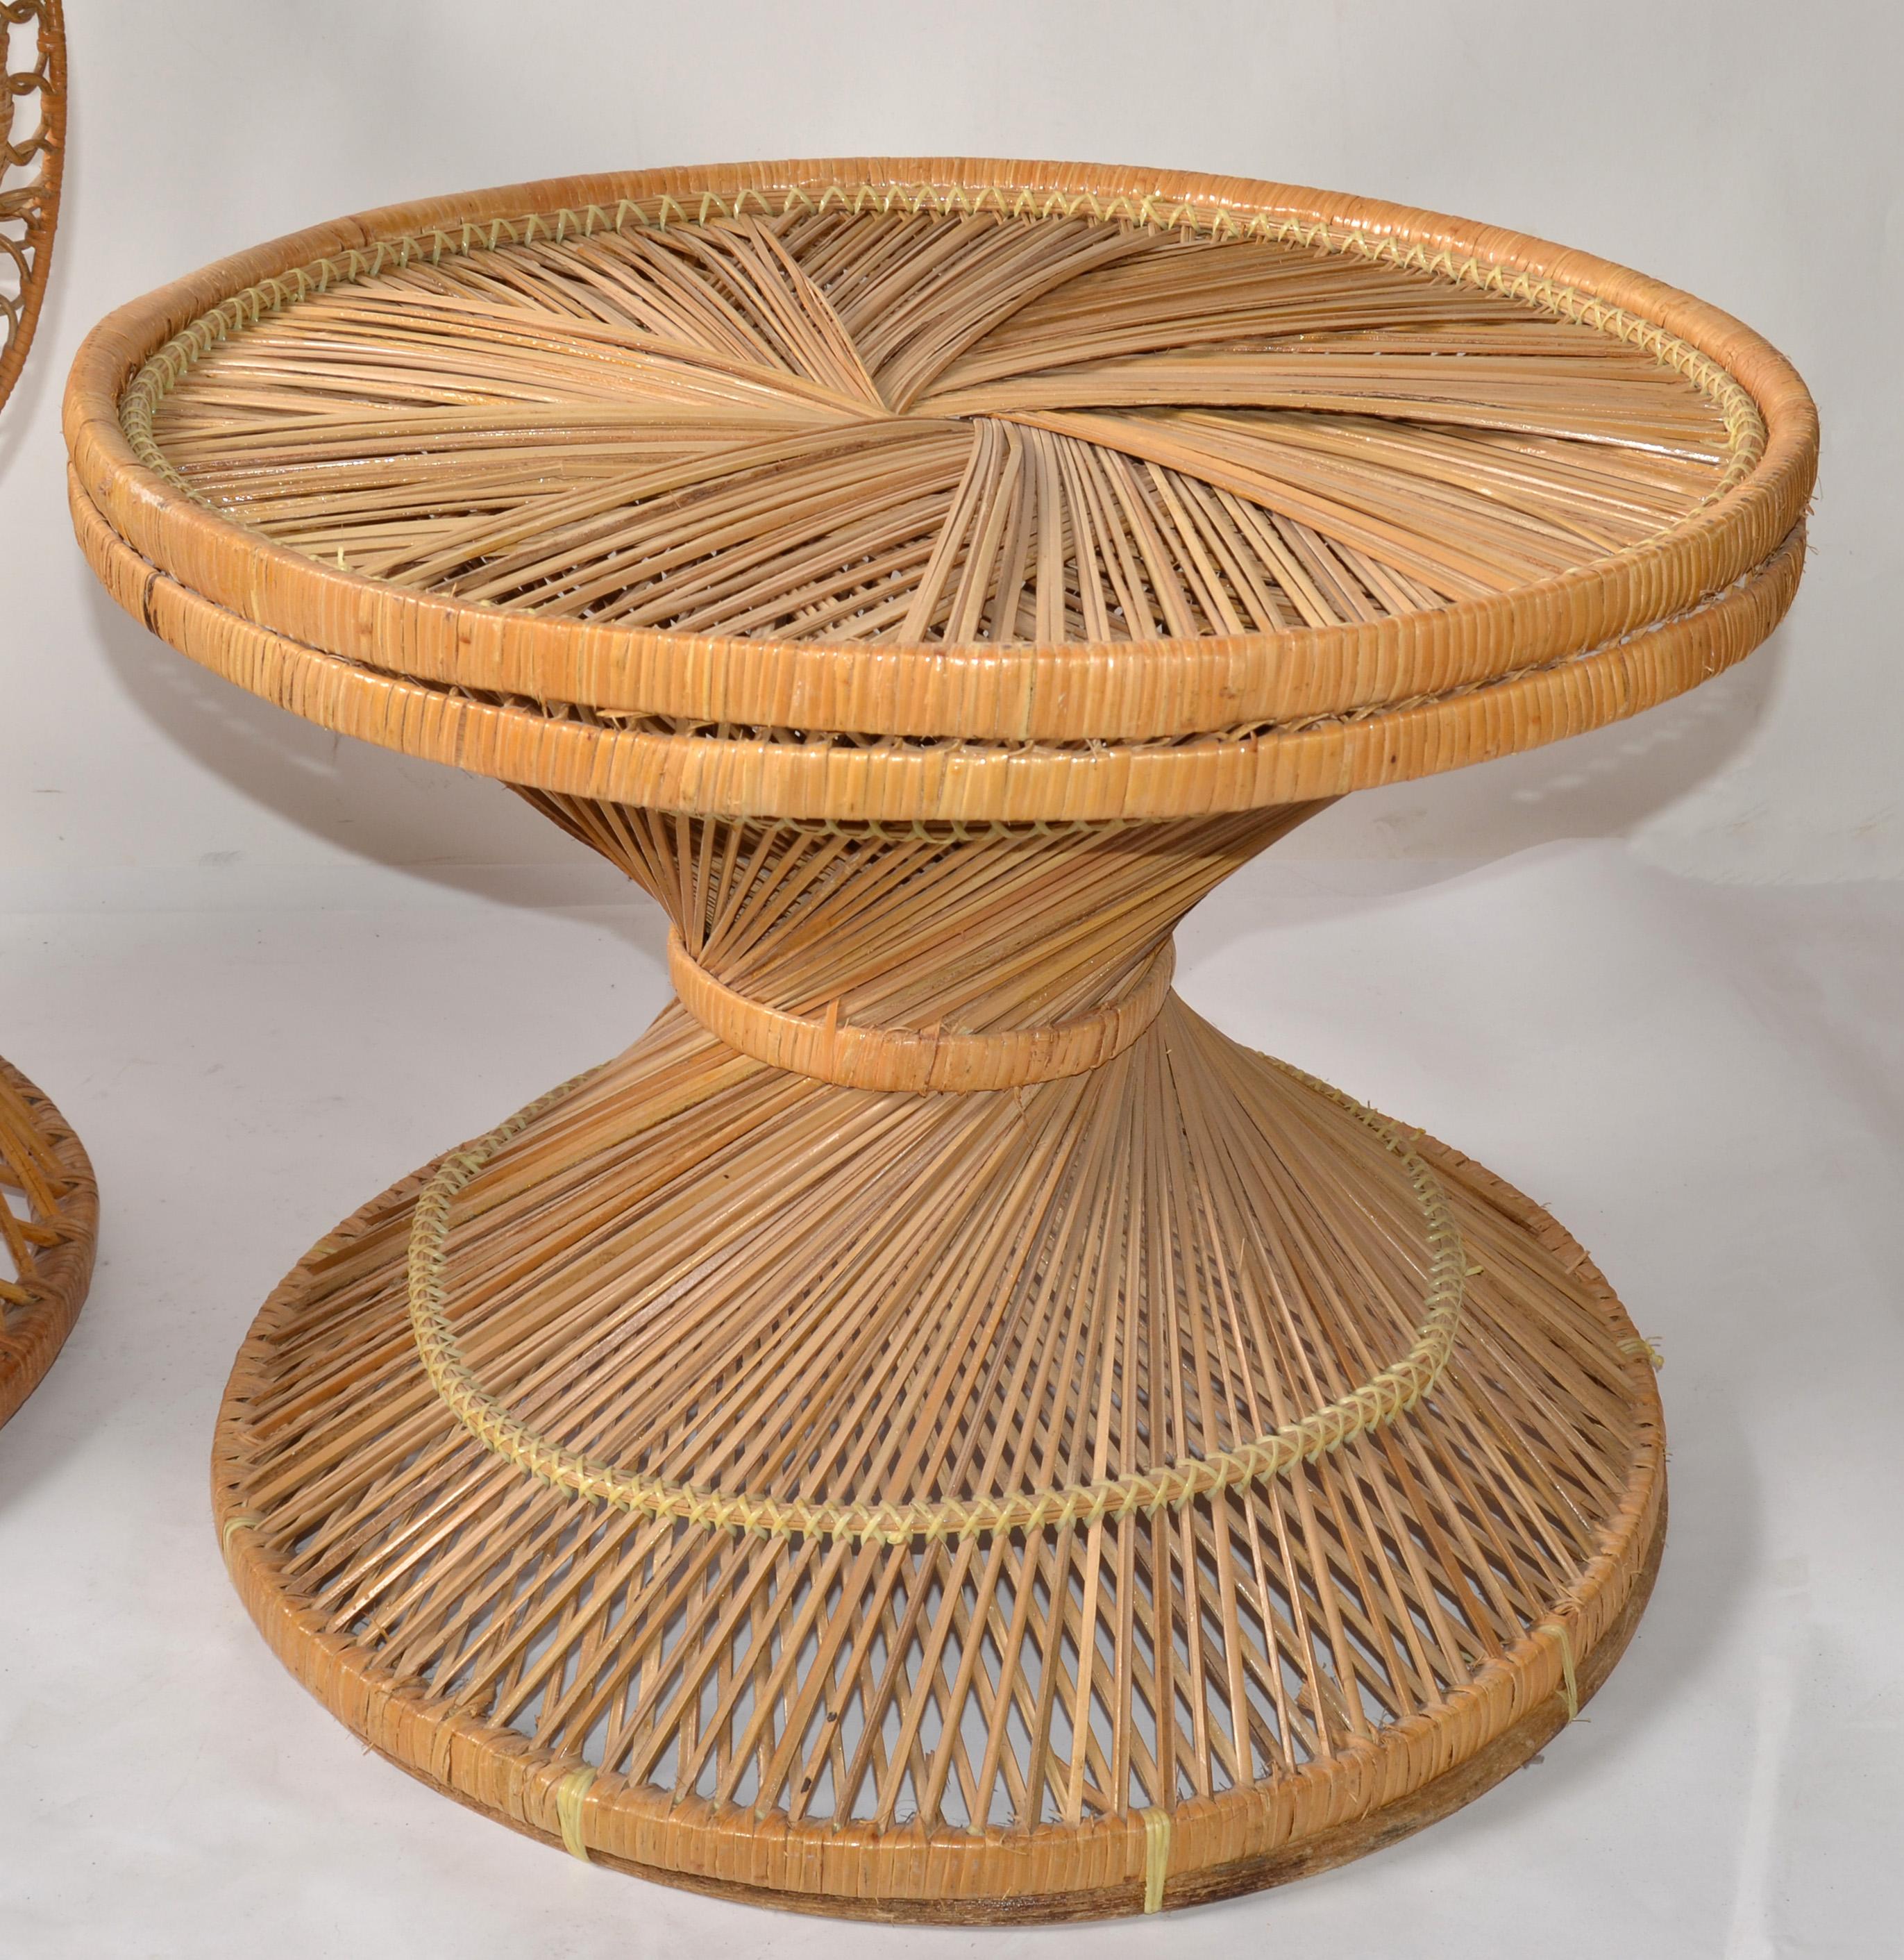 Coastal Vintage Round Rattan Accent Table Hand-Woven Wicker Caning Peacock Chair en vente 1